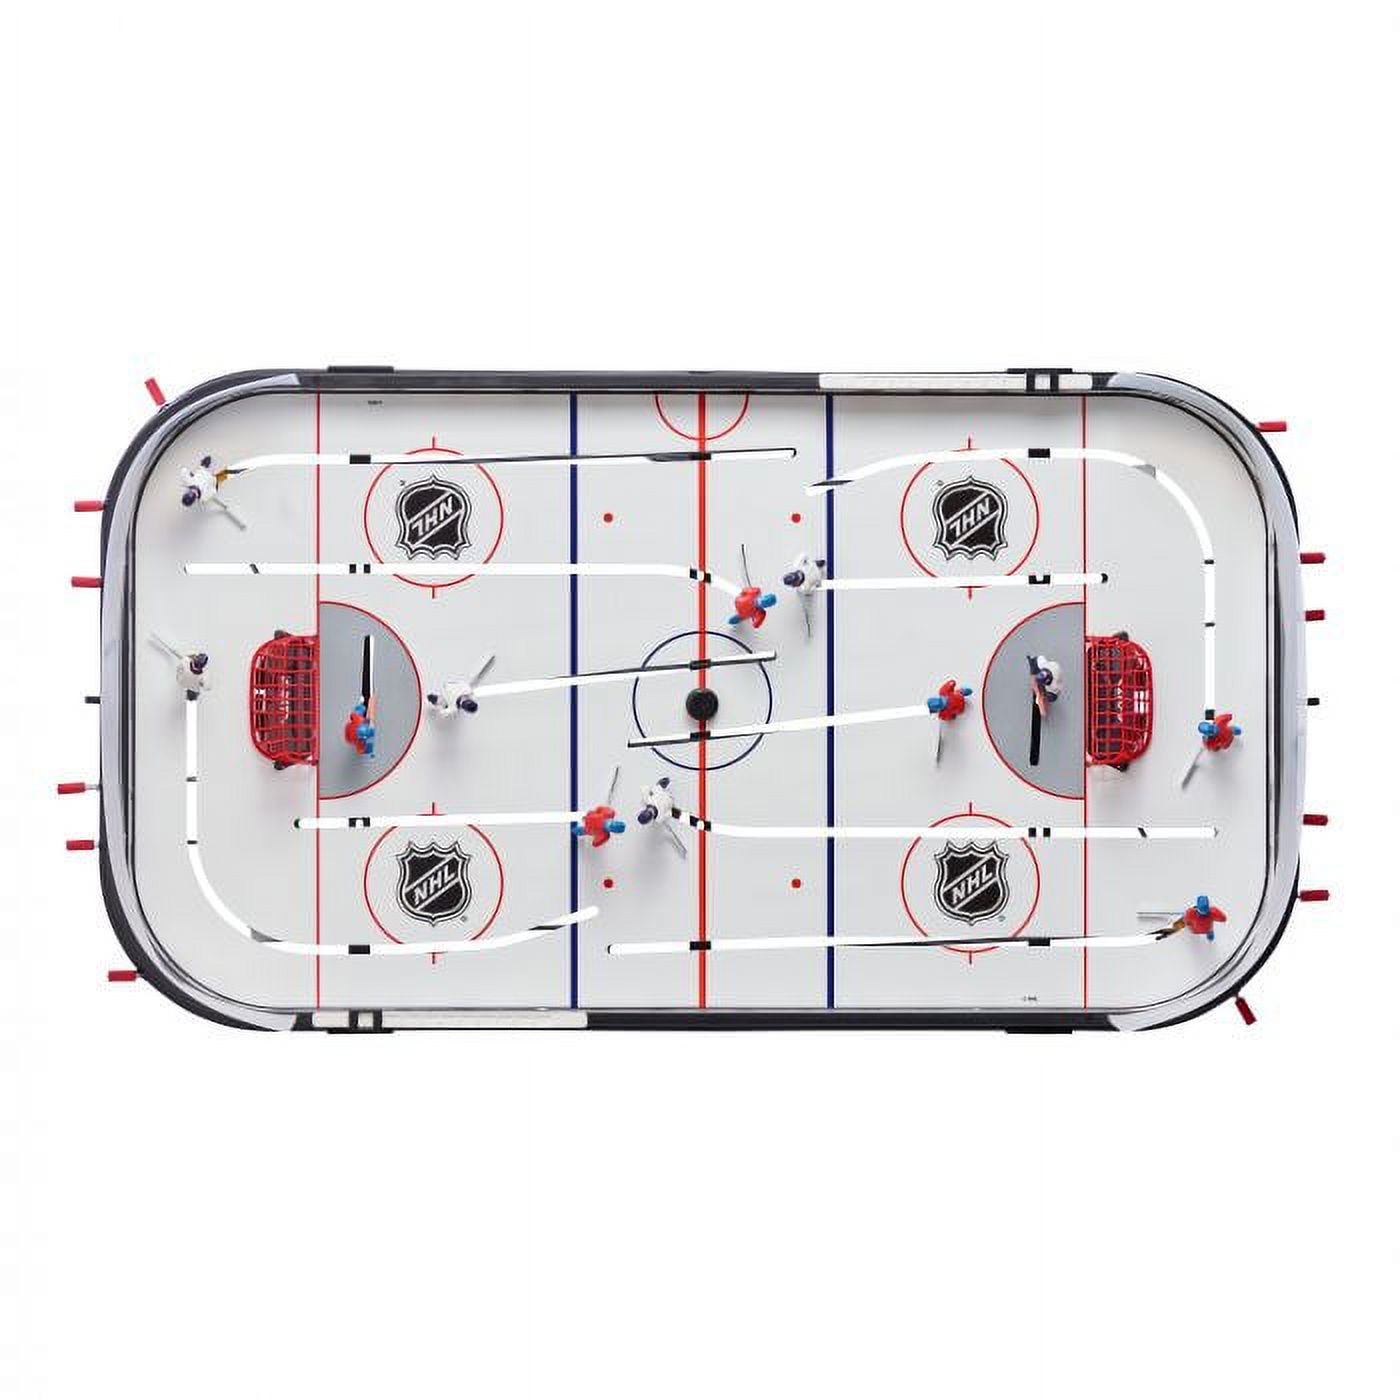 STIGA 3T NHL Stanley Cup Table Hockey Game - image 3 of 6